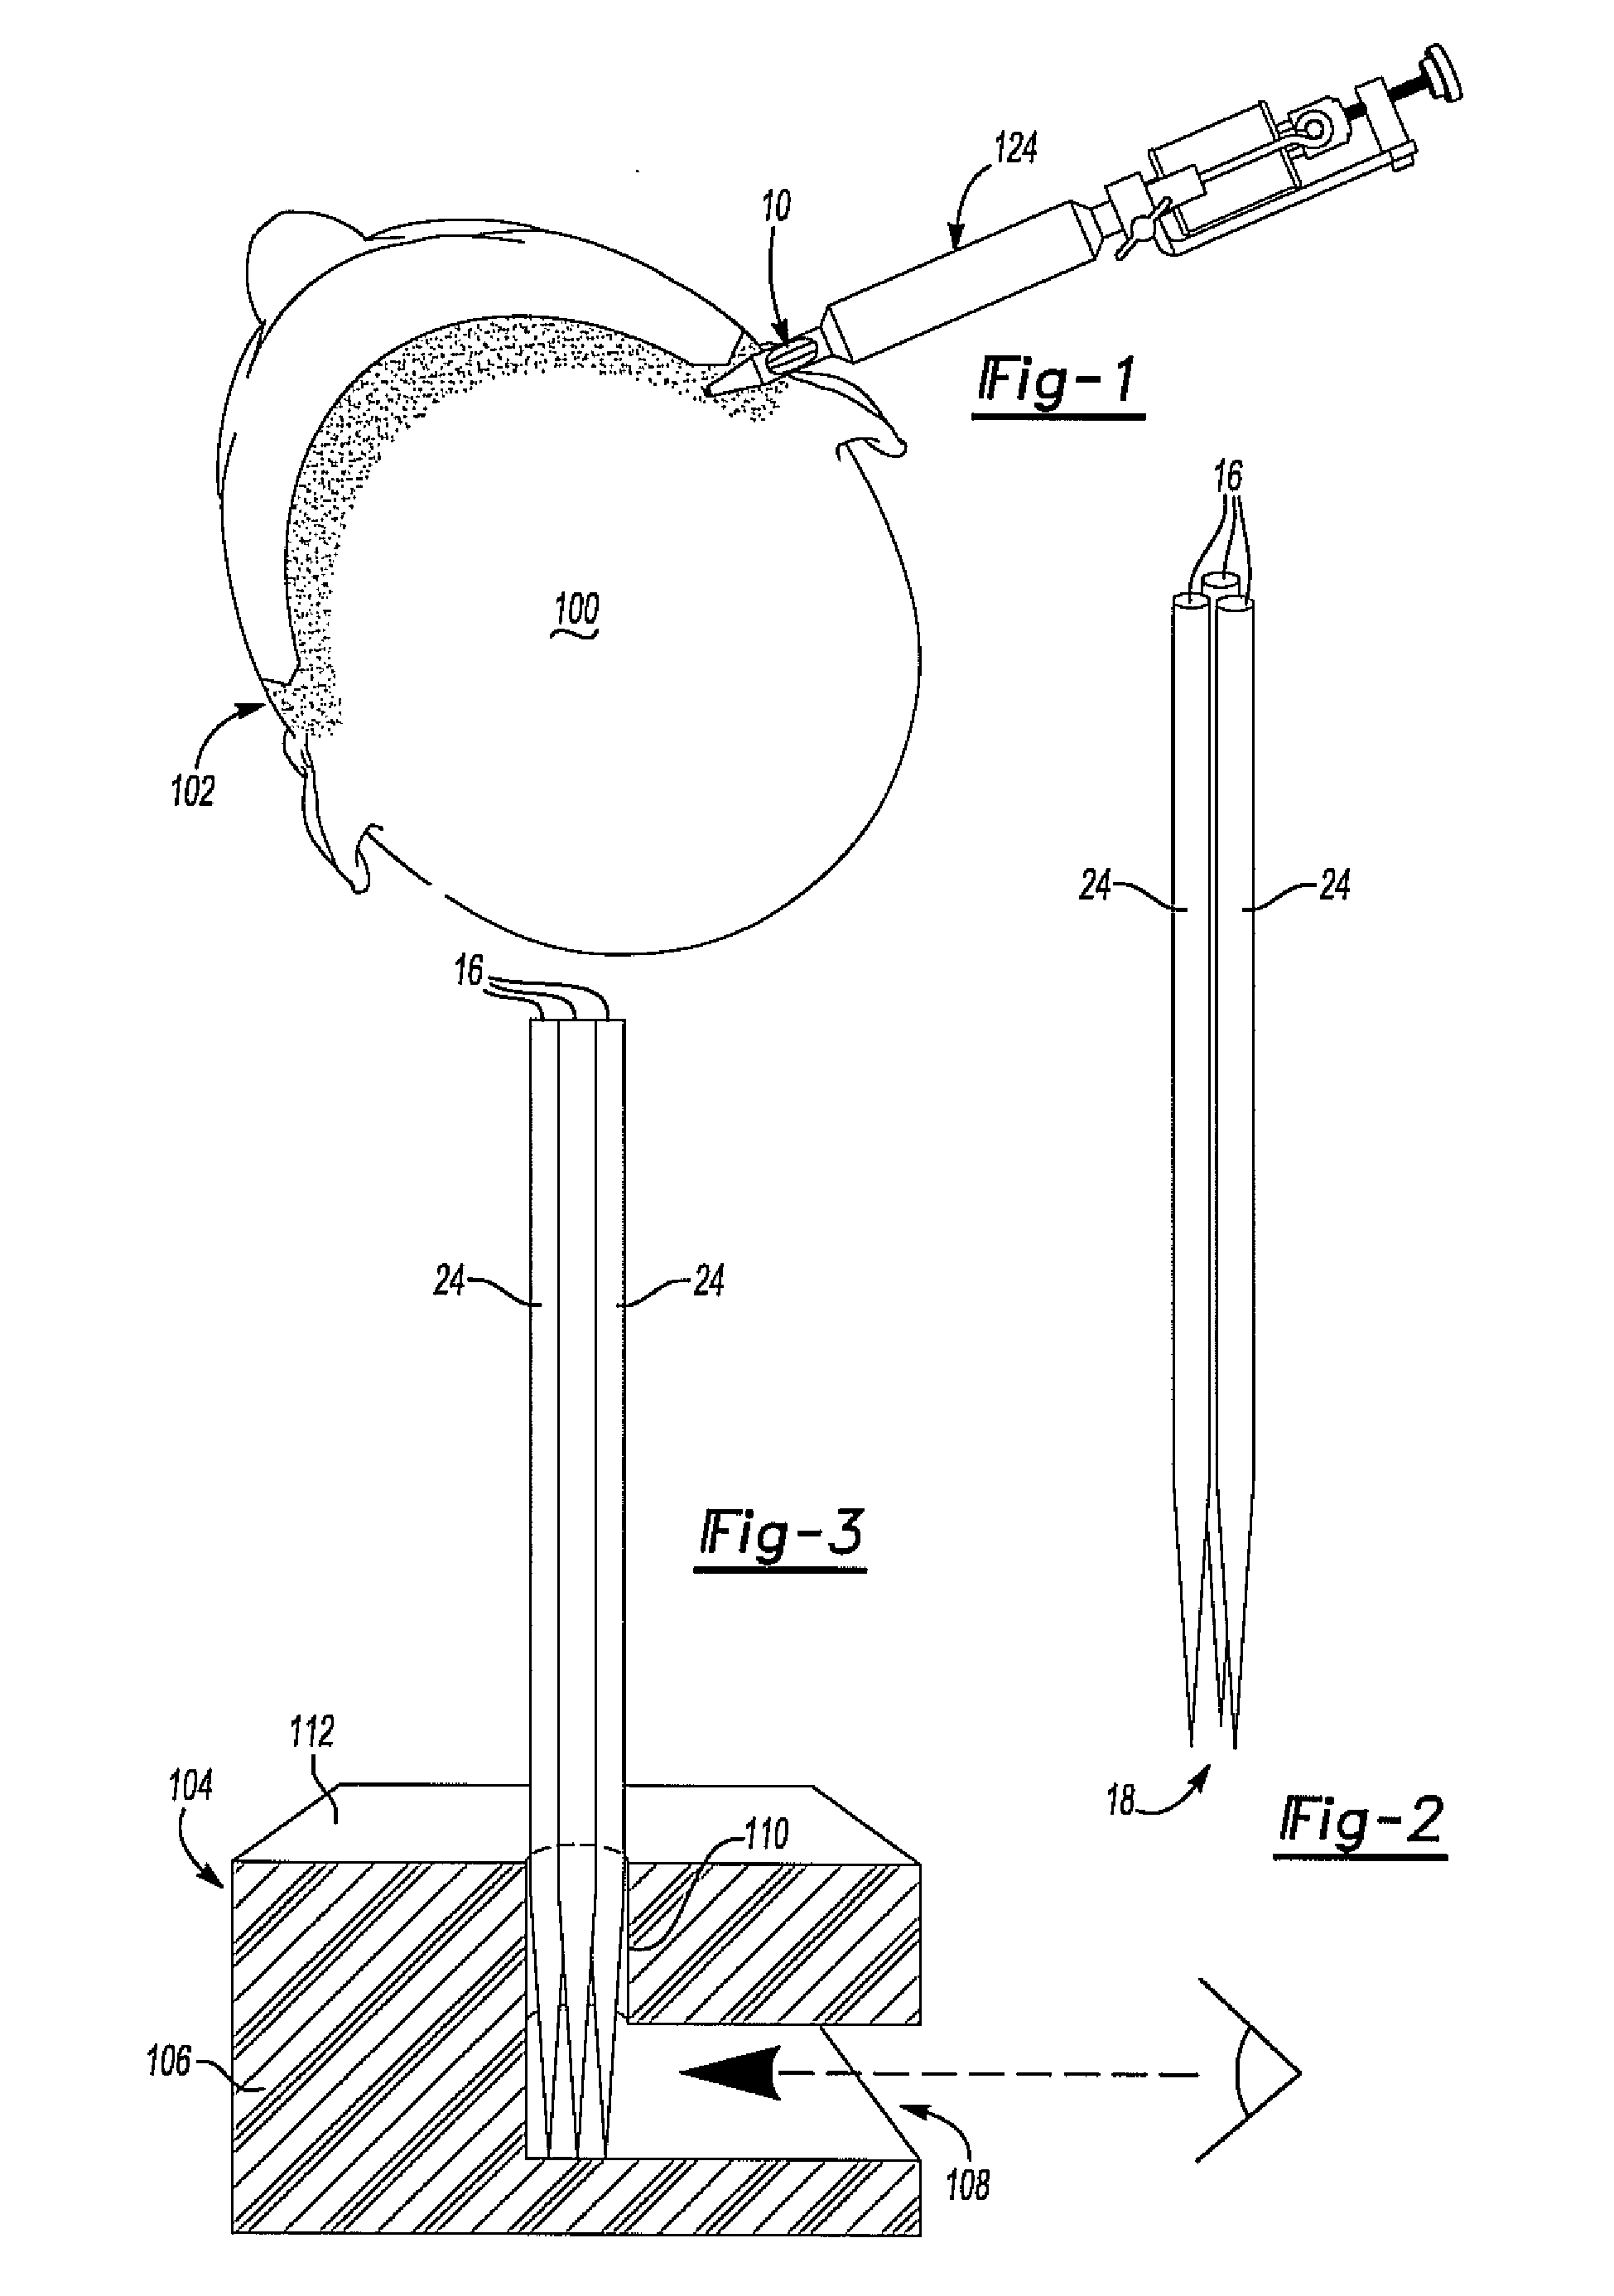 Tattoo needle and method for making and using same